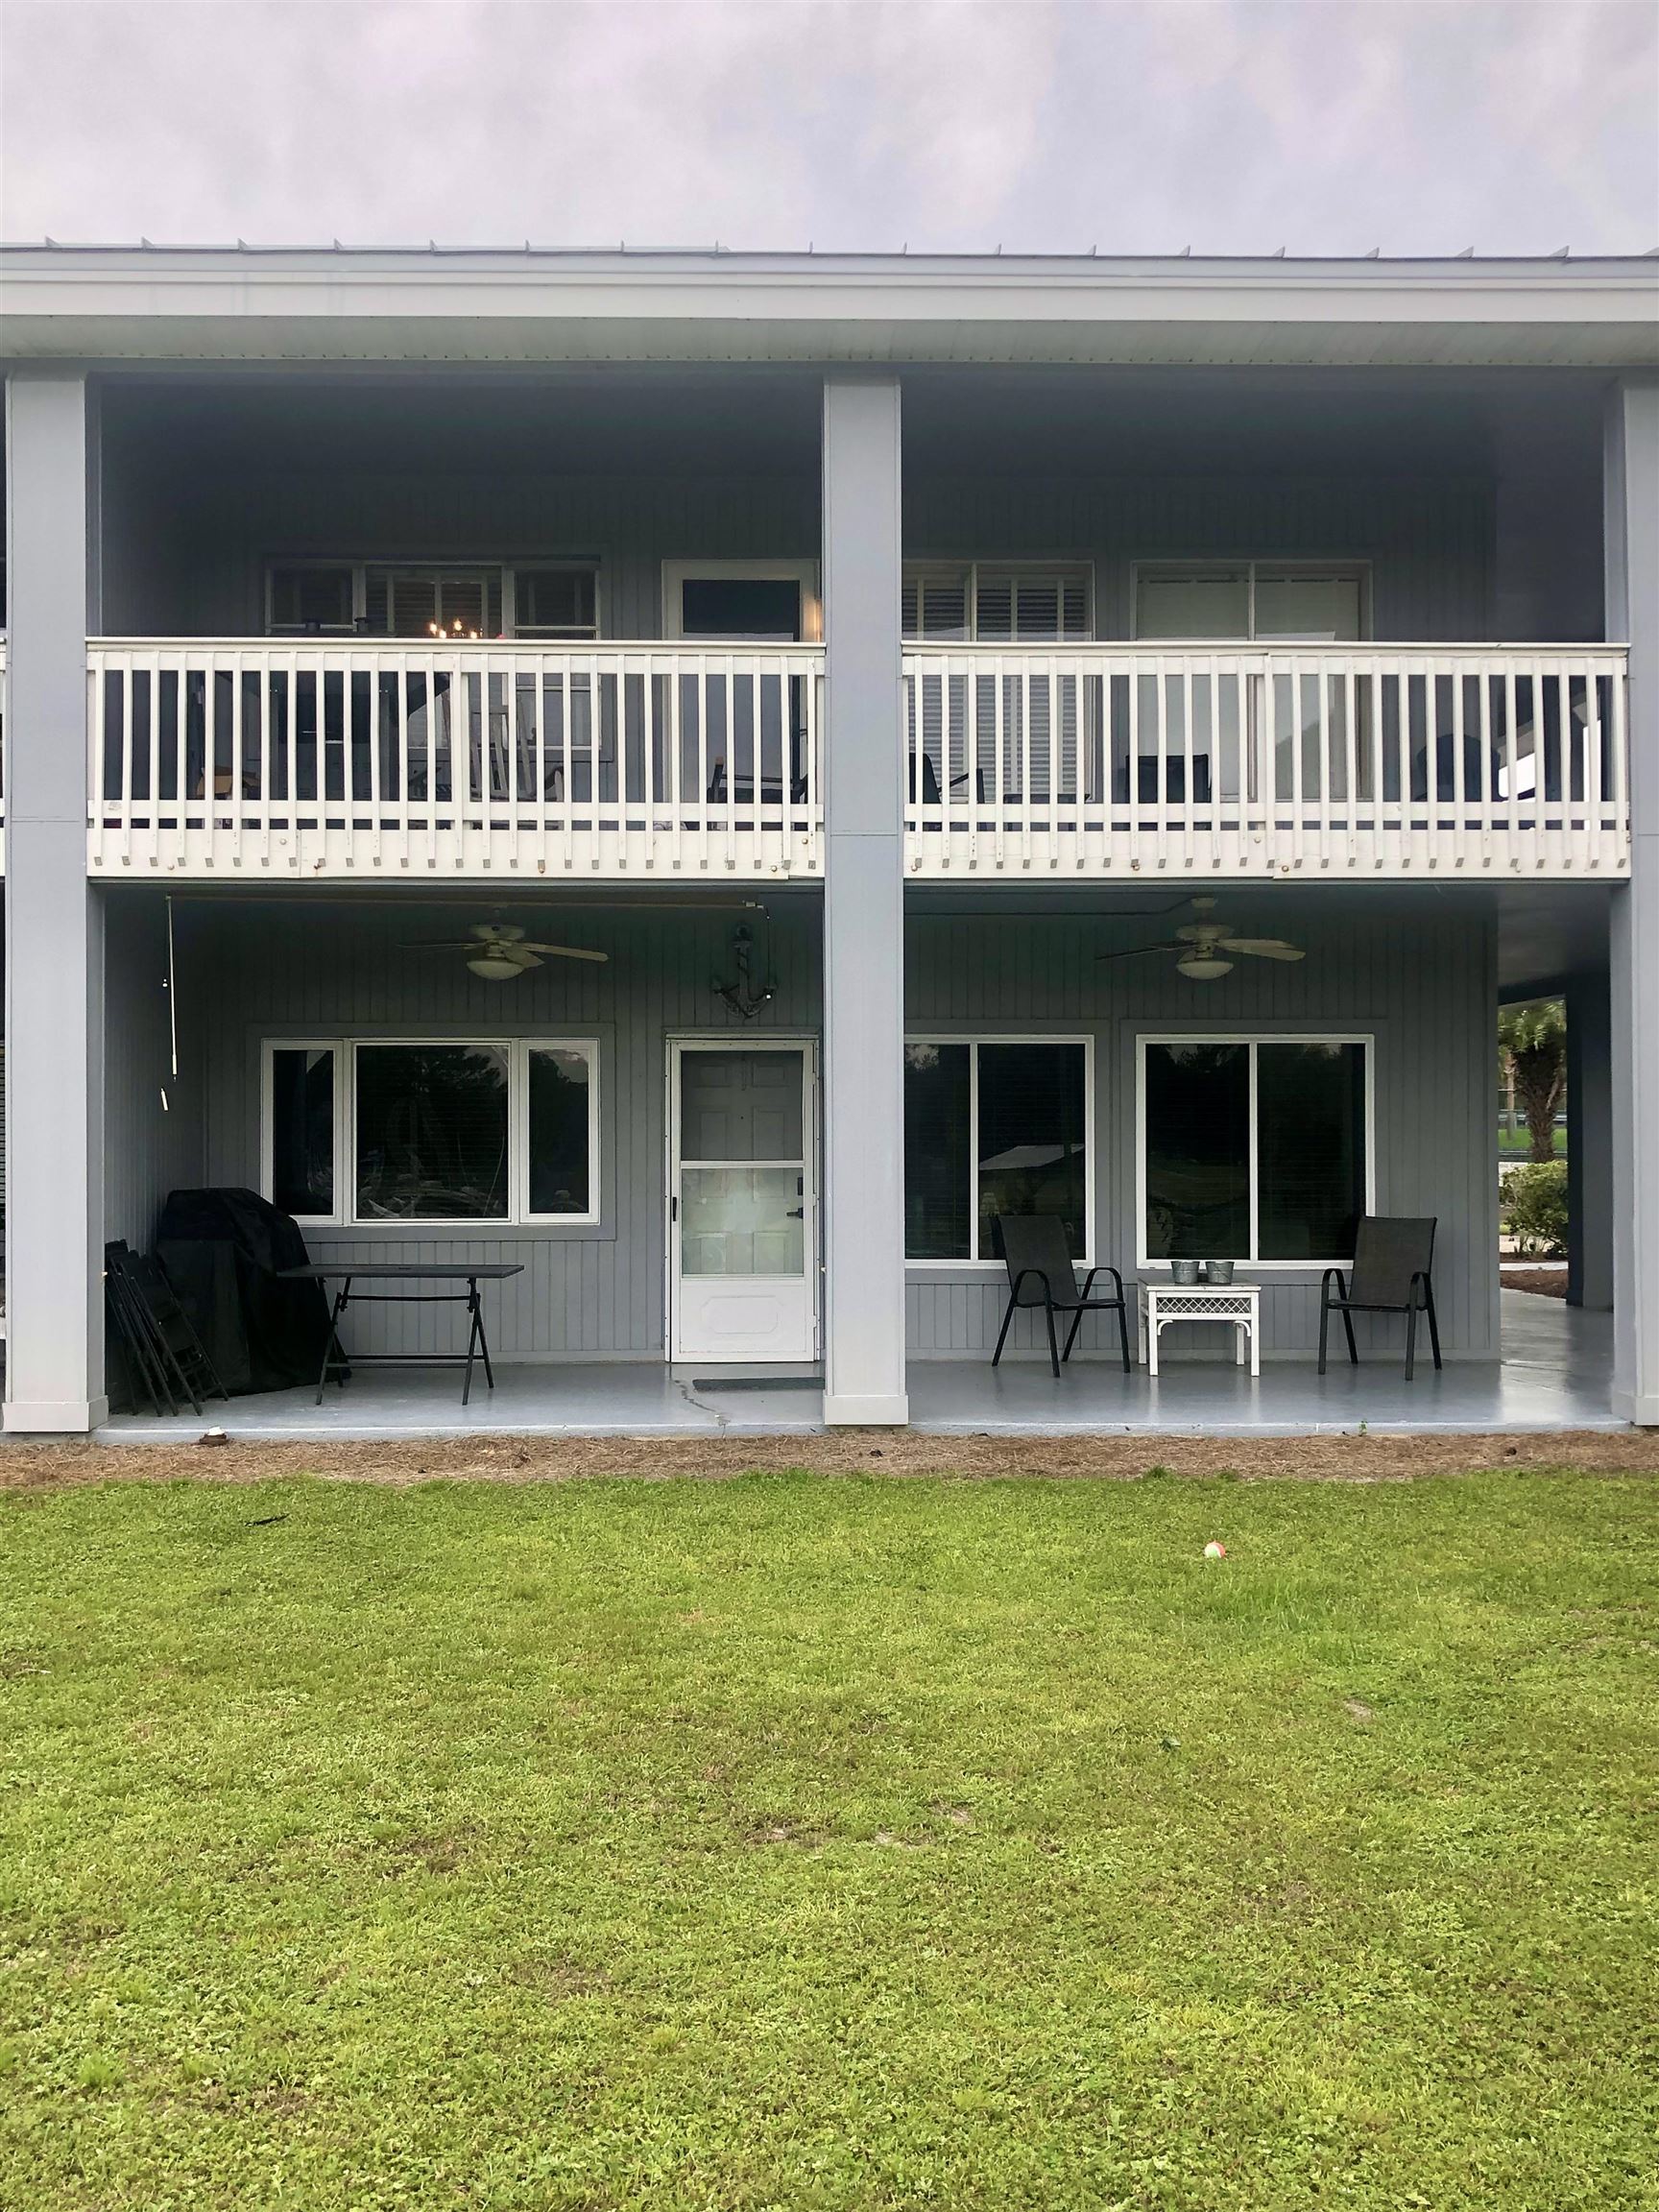 11 Mashes Sands Road,PANACEA,Florida 32346,2 Bedrooms Bedrooms,1 BathroomBathrooms,Condo,11 Mashes Sands Road,369974